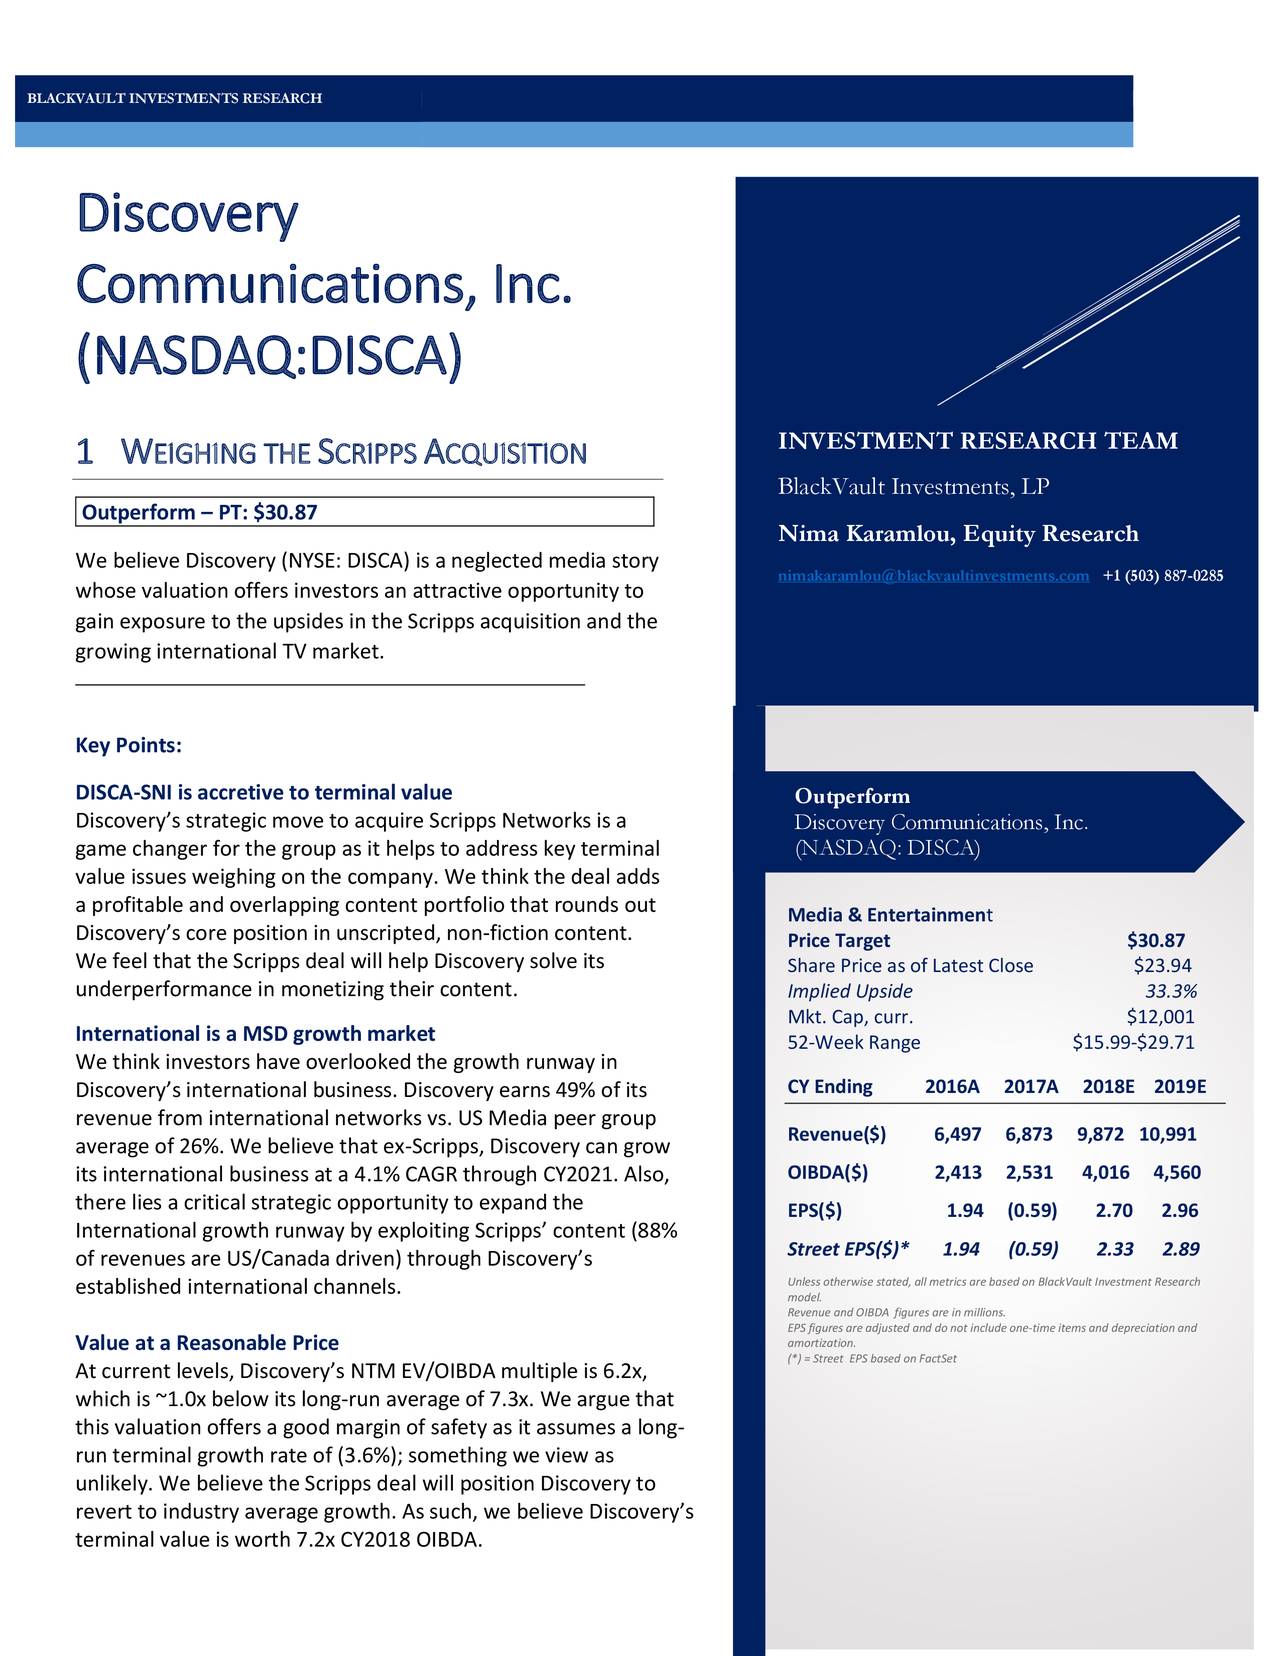 Discovery Communications, Inc. (NASDAQ:DISCA) 1 W EIGHING THE S CRIPPS A CQUISITION INVESTMENT RESEARCH TEAM BlackVault Investments, LP Outperform – PT: $30.87 t Nima Karamlou, Equity Research We believe Discovery (NYSE: DISCA) is a neglected media story whose valuation offers investors an attractive opportunity to nimakaramlou@blackvaultinvestments.com +1 (503) 887-0285 gain exposure to the upsides in the Scripps acquisition and the growing international TV market. Key Points: DISCA-SNI is accretive to terminal value Outperform Discovery’s strategic move to acquire Scripps Networks is a Discovery Communications, Inc. game changer for the group as it helps to address key terminal (NASDAQ: DISCA) value issues weighing on the company. We think the deal adds a profitable and overlapping content portfolio that rounds out Discovery’s core position in unscripted, non-fiction content. Media & Entertainment Price Target $30.87 We feel that the Scripps deal will help Discovery solve its Share Price as of Latest Close $23.94 underperformance in monetizing their content. Implied Upside 33.3% Mkt. Cap, curr. $12,001 International is a MSD growth market 52-Week Range $15.99-$29.71 We think investors have overlooked the growth runway in Discovery’s international business. Discovery earns 49% of its CY Ending 2016A 2017A 2018E 2019E revenue from international networks vs. US Media peer group Revenue($) 6,497 6,873 9,872 10,991 average of 26%. We believe that ex-Scripps, Discovery can grow its international business at a 4.1% CAGR through CY2021. Also, OIBDA($) 2,413 2,531 4,016 4,560 there lies a critical strategic opportunity to expand the EPS($) 1.94 (0.59) 2.70 2.96 International growth runway by exploiting Scripps’ content (88% Street EPS($)* 1.94 (0.59) 2.33 2.89 of revenues are US/Canada driven) through Discovery’s established international channels. model. otherwise stated, all metrics are based on BlackVault Investment Research Revenue and OIBDA figures are in millions. Value at a Reasonable Price amortization.re adjusted and do not include one-time items and depreciation and (*) = Street EPS based on FactSet At current levels, Discovery’s NTM EV/OIBDA multiple is 6.2x, which is ~1.0x below its long-run average of 7.3x. We argue that this valuation offers a good margin of safety as it assumes a long- run terminal growth rate of (3.6%); something we view as unlikely. We believe the Scripps deal will position Discovery to revert to industry average growth. As such, we believe Discovery’s terminal value is worth 7.2x CY2018 OIBDA.